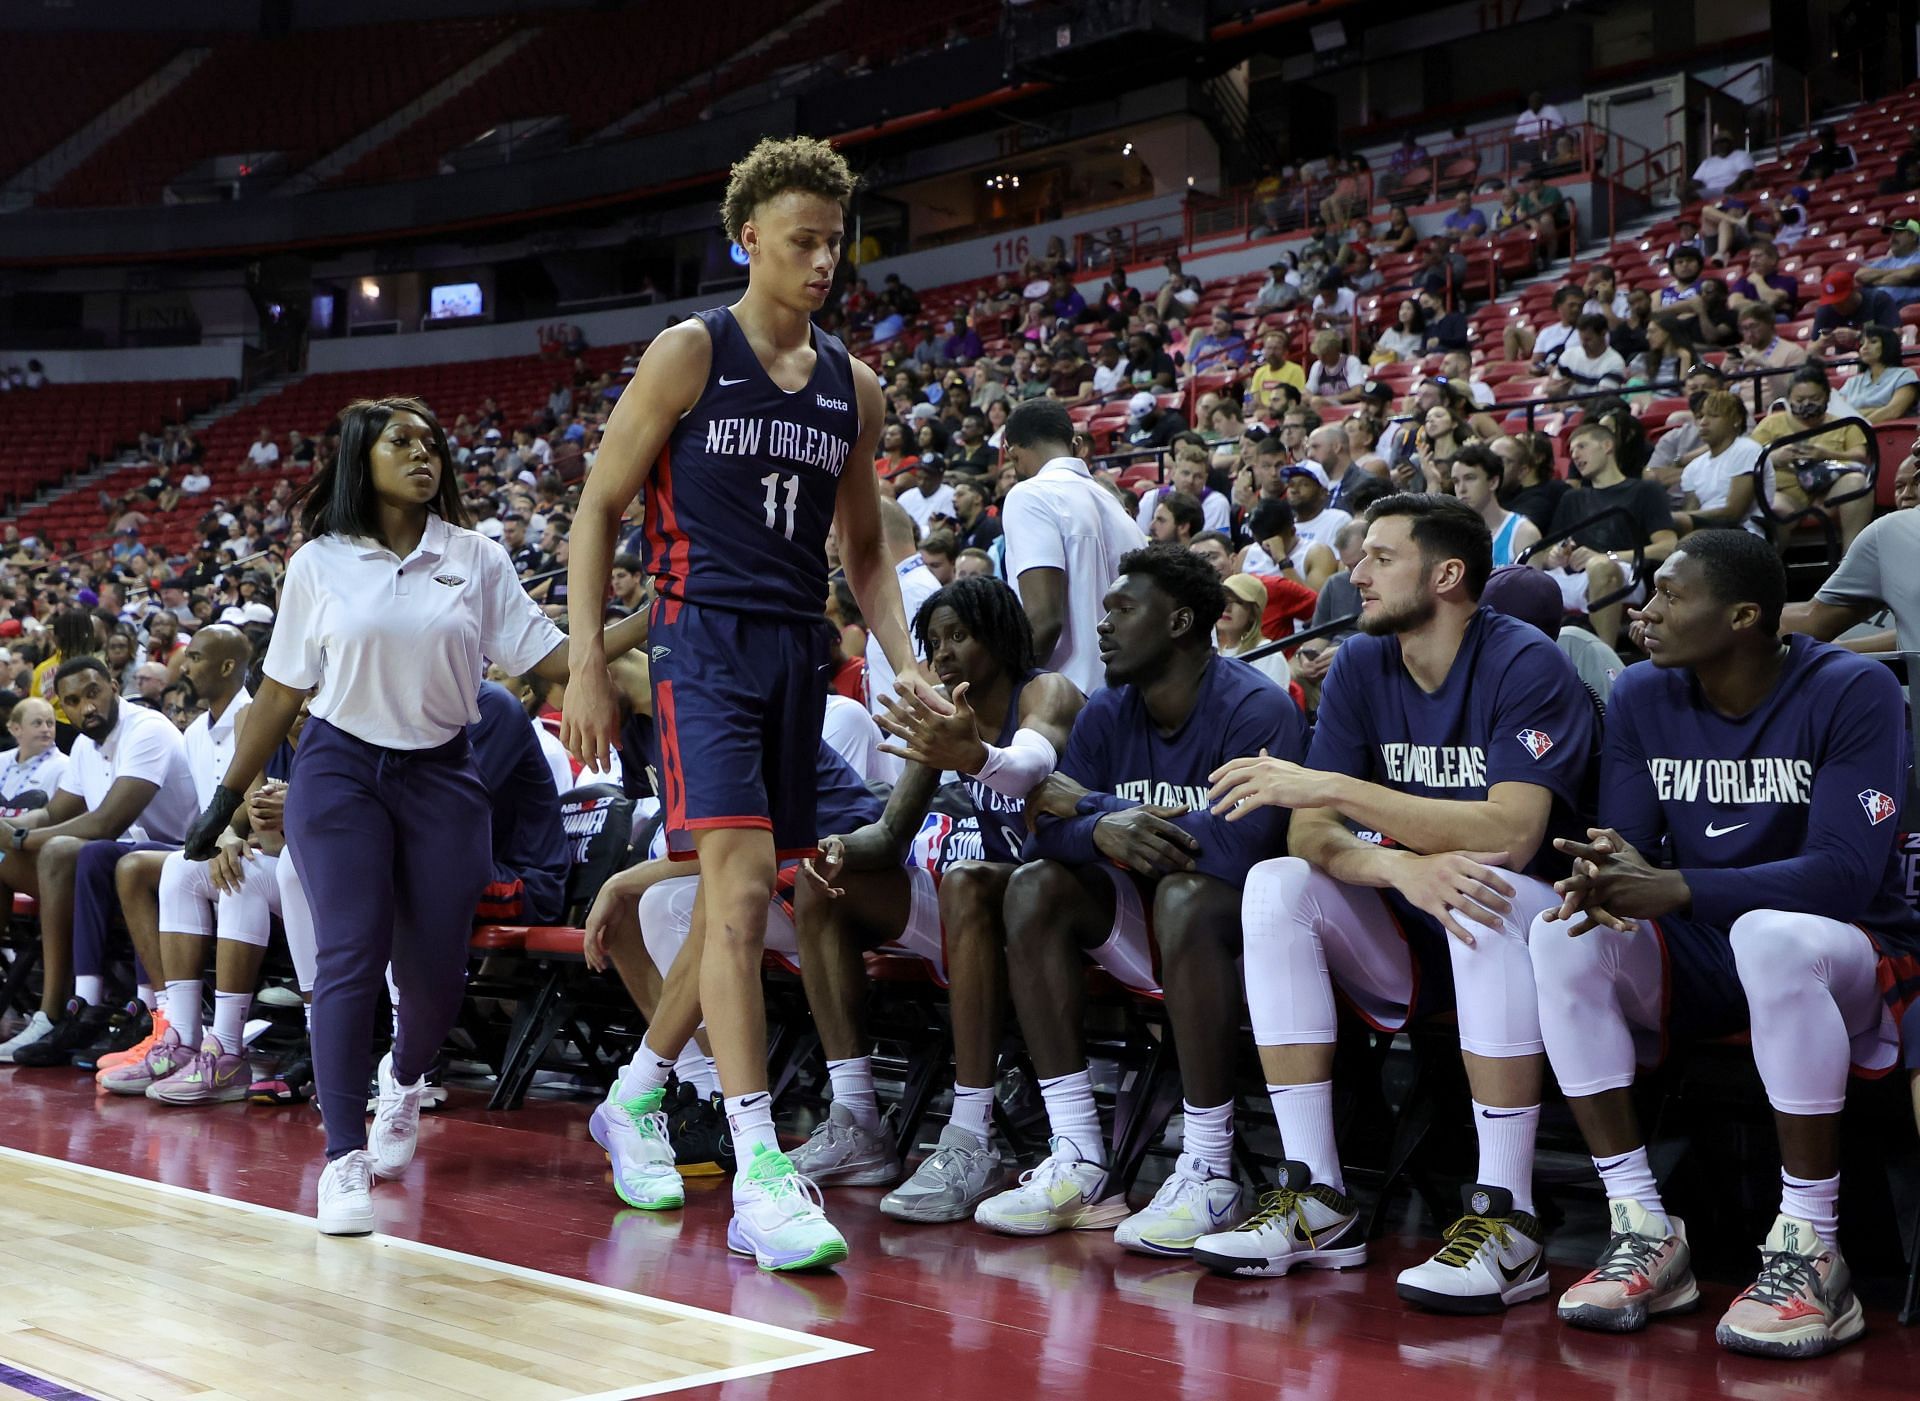 New Orleans Pelicans will look to extend their winning streak to two against the Washington Wizards